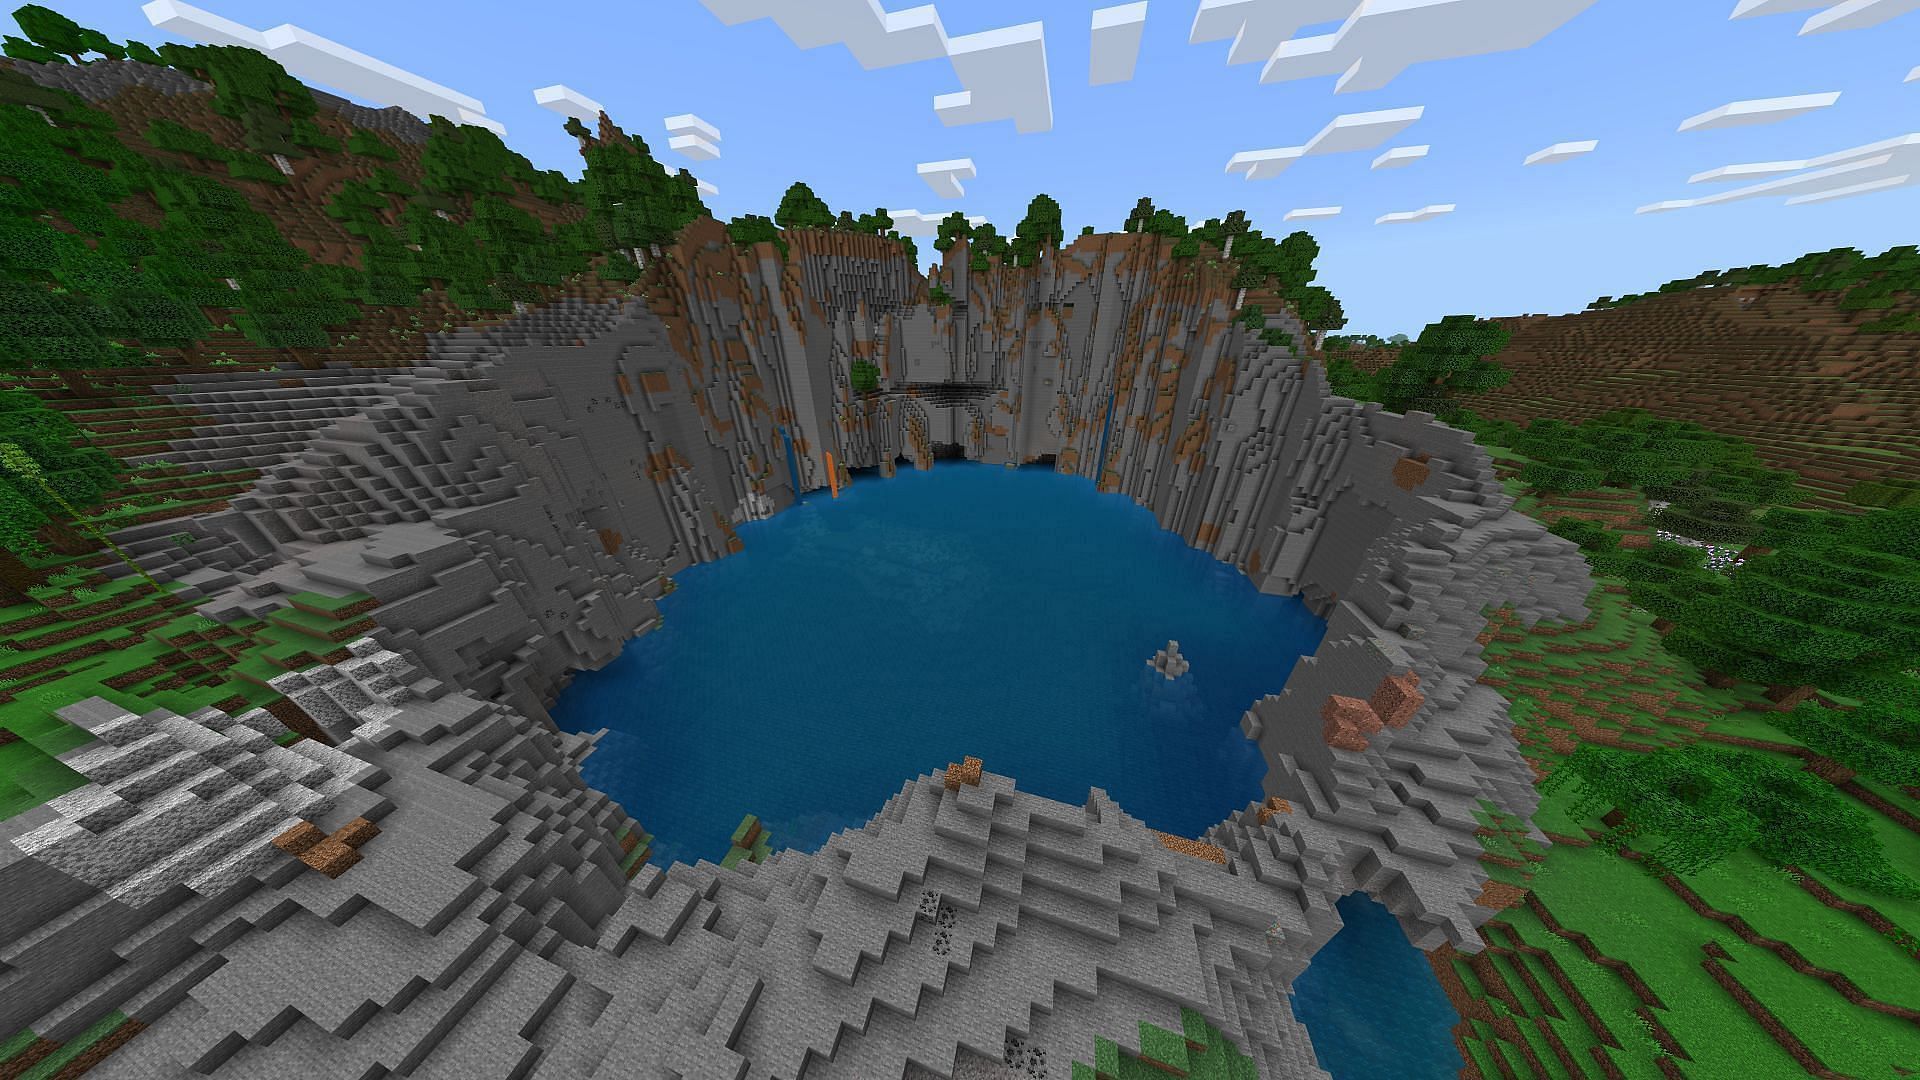 The crater in this Minecraft seed is filled to the brim with places to explore (Image via Rusty_Amunition/Reddit)